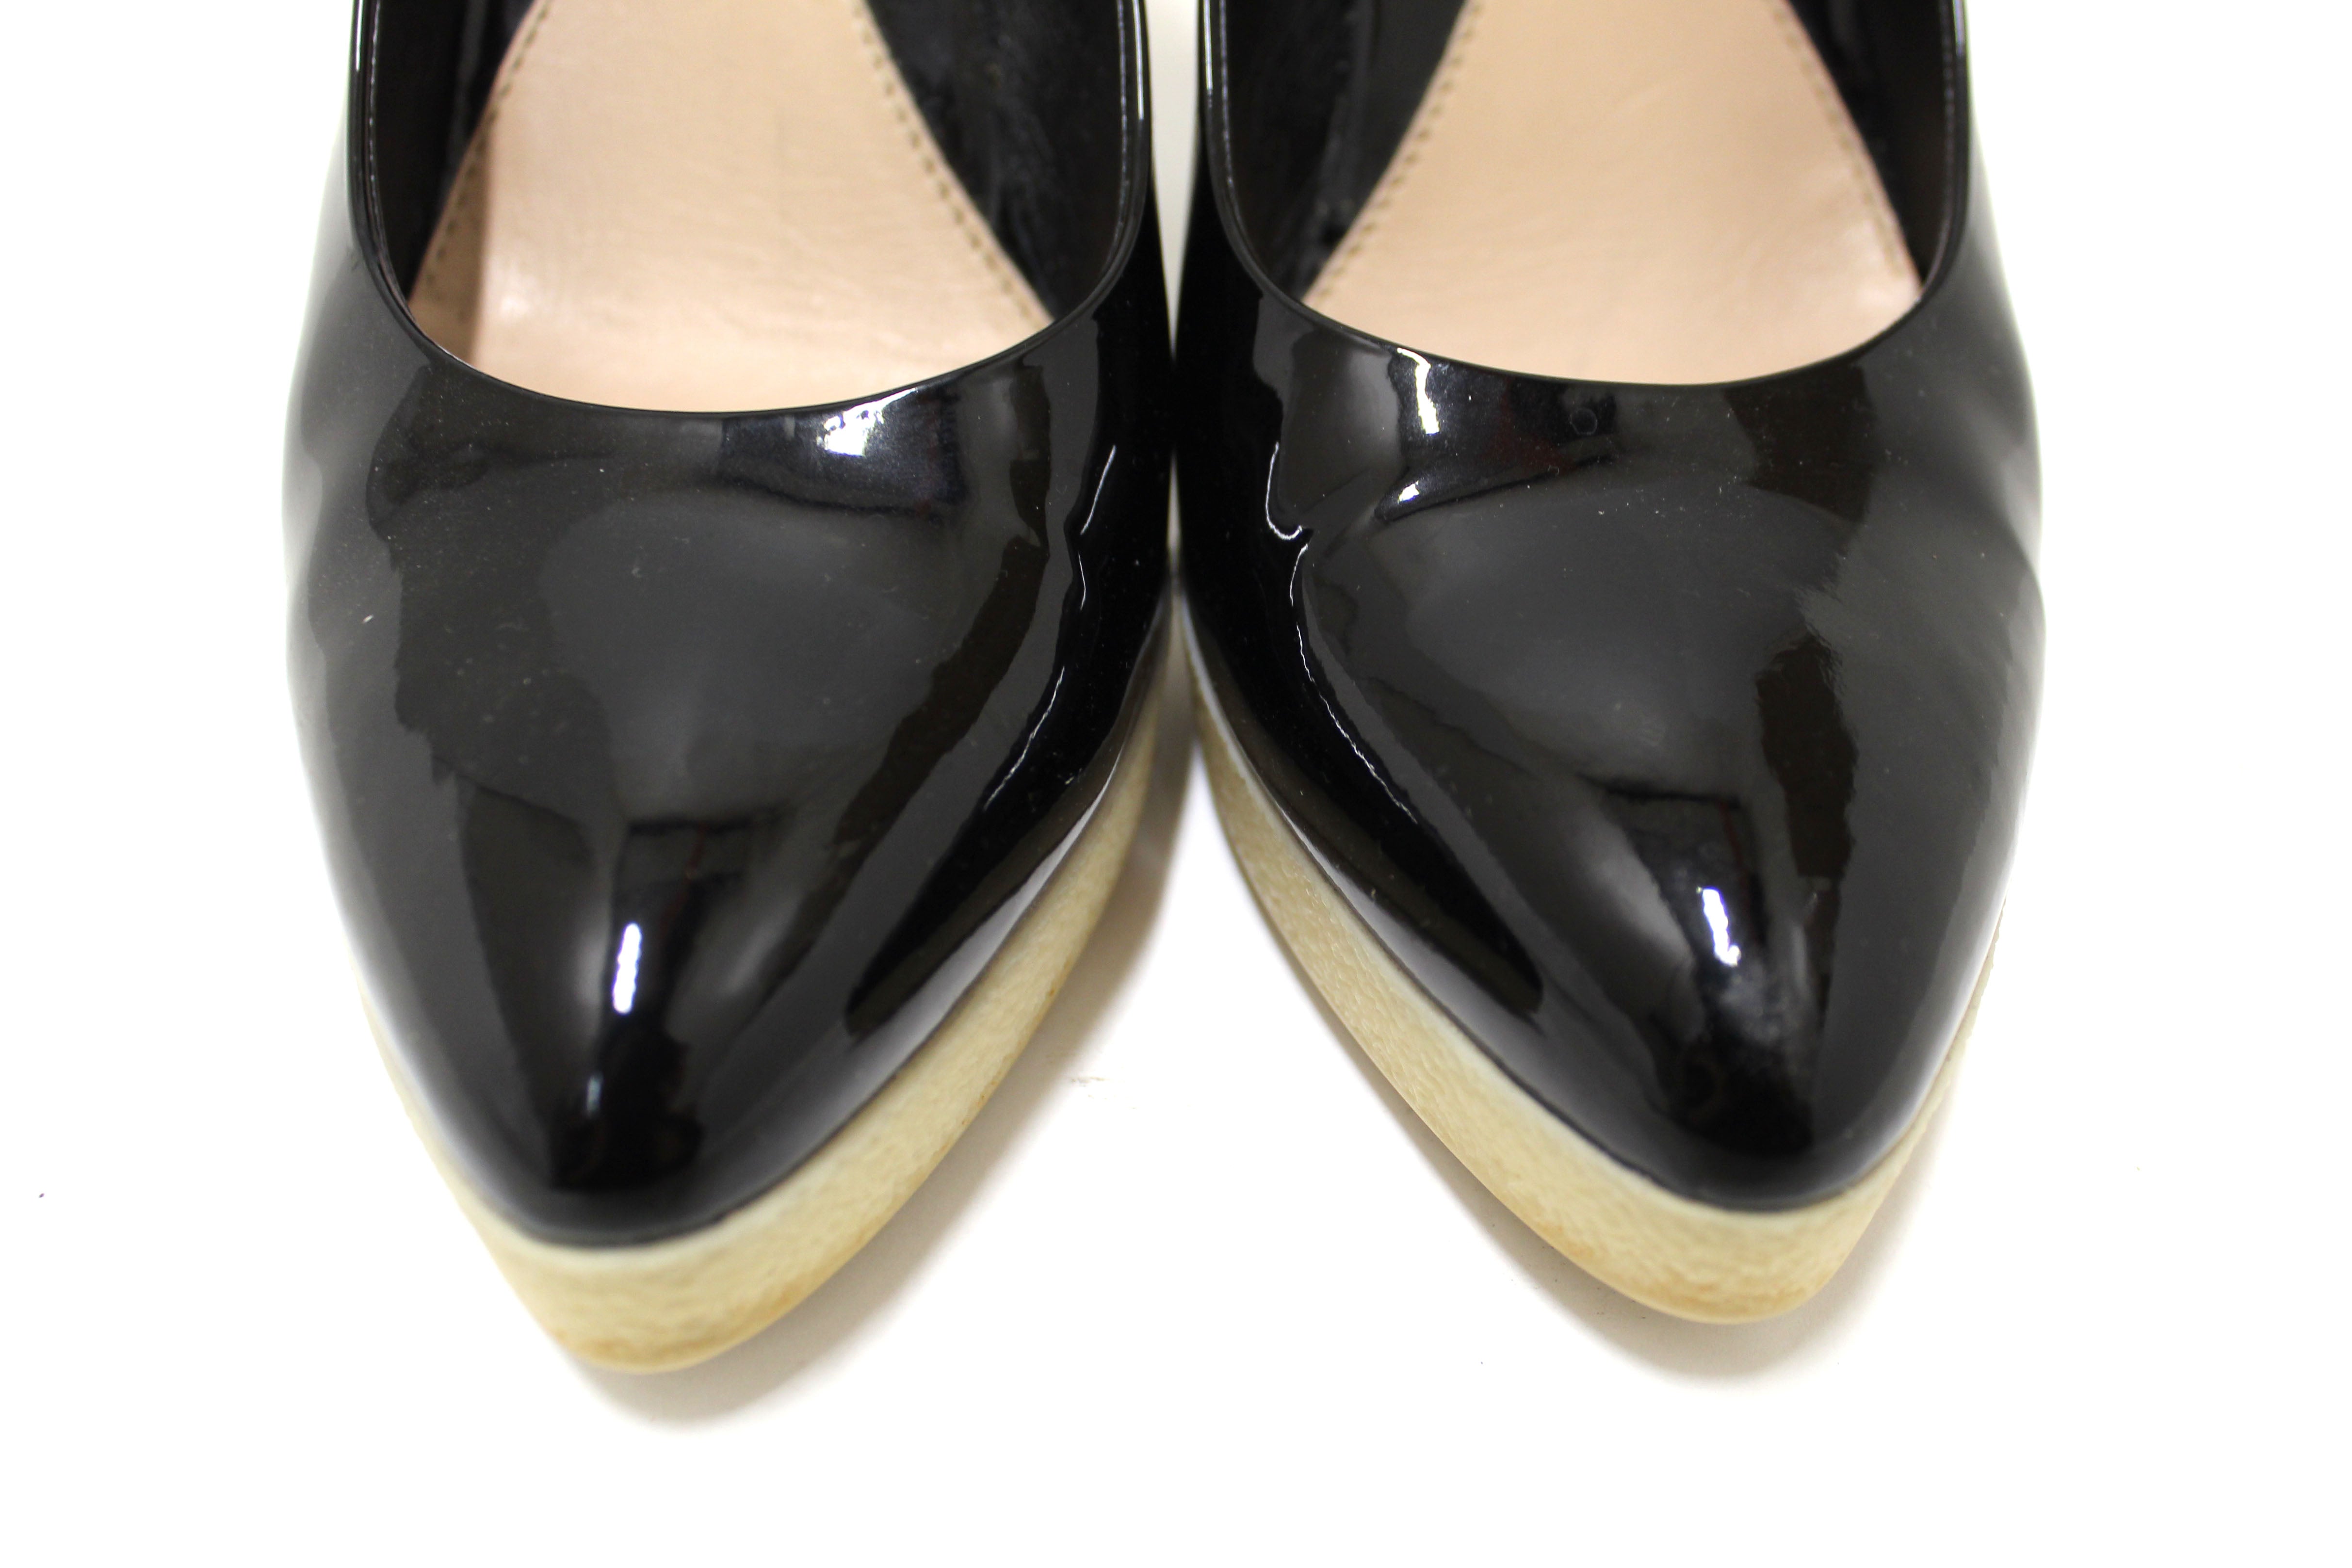 Authentic Gucci Black Patent Leather and White Rubber Pumps Heels Size 39